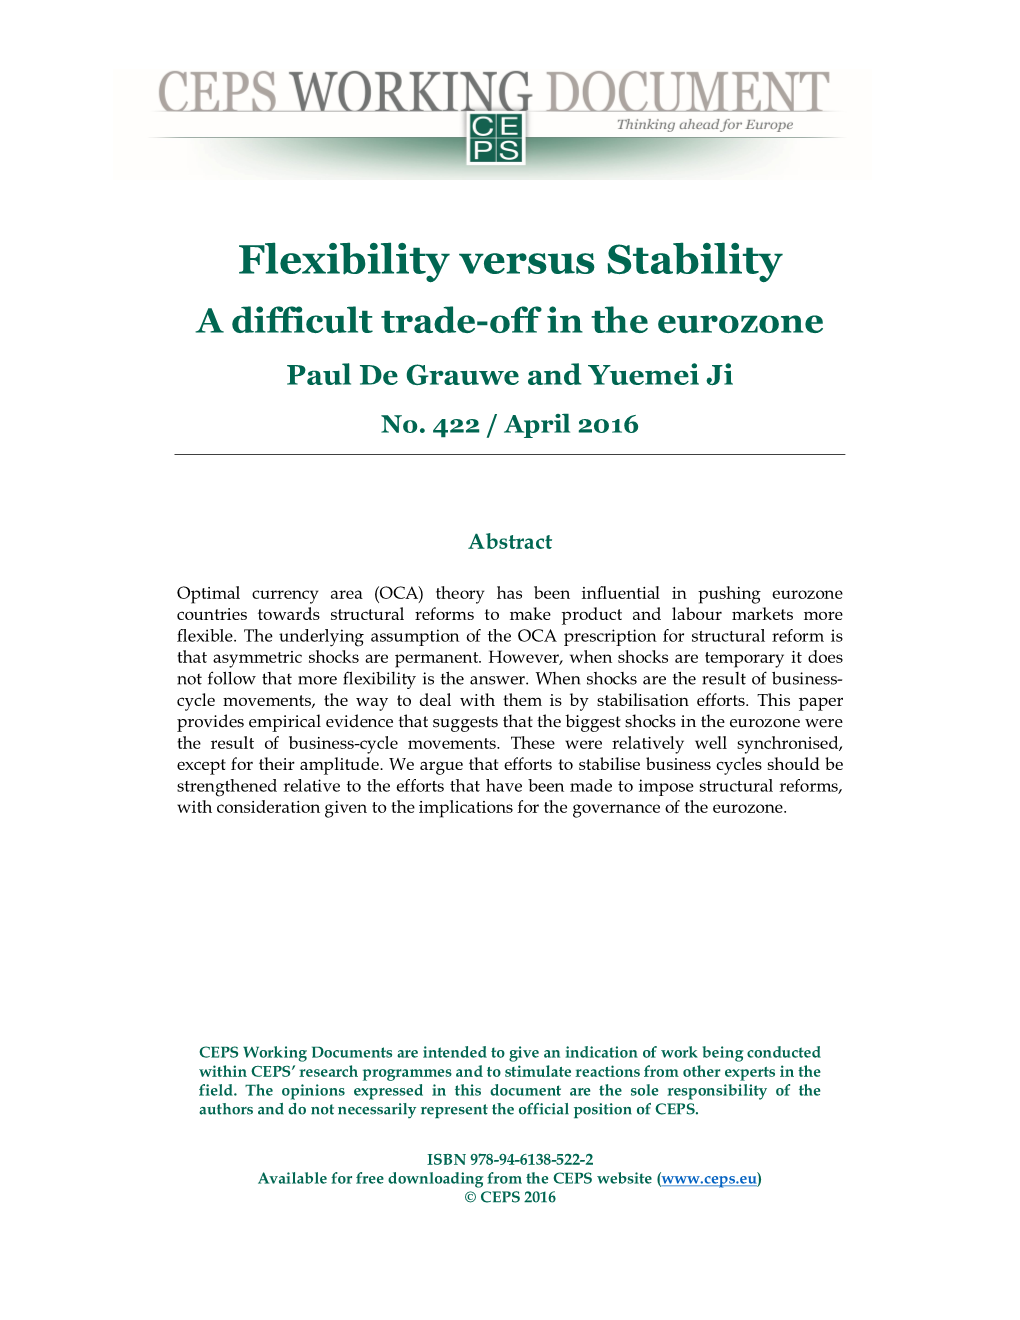 Flexibility Versus Stability a Difficult Trade-Off in the Eurozone Paul De Grauwe and Yuemei Ji No